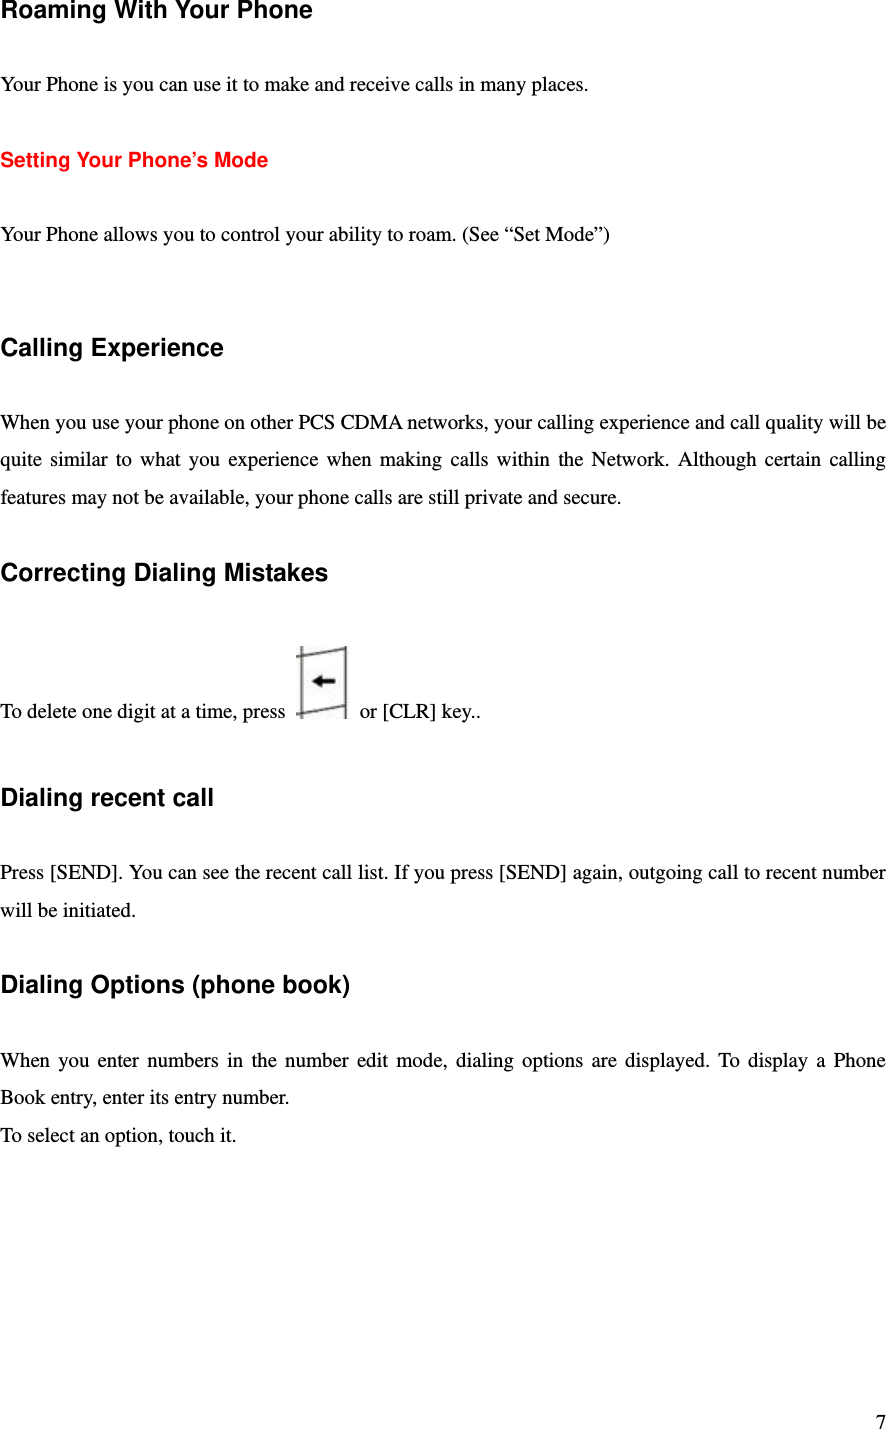 7 Roaming With Your Phone  Your Phone is you can use it to make and receive calls in many places.  Setting Your Phone’s Mode  Your Phone allows you to control your ability to roam. (See “Set Mode”)   Calling Experience  When you use your phone on other PCS CDMA networks, your calling experience and call quality will be quite similar to what you experience when making calls within the Network. Although certain calling features may not be available, your phone calls are still private and secure.  Correcting Dialing Mistakes  To delete one digit at a time, press    or [CLR] key..  Dialing recent call  Press [SEND]. You can see the recent call list. If you press [SEND] again, outgoing call to recent number will be initiated.  Dialing Options (phone book)  When you enter numbers in the number edit mode, dialing options are displayed. To display a Phone Book entry, enter its entry number. To select an option, touch it. 